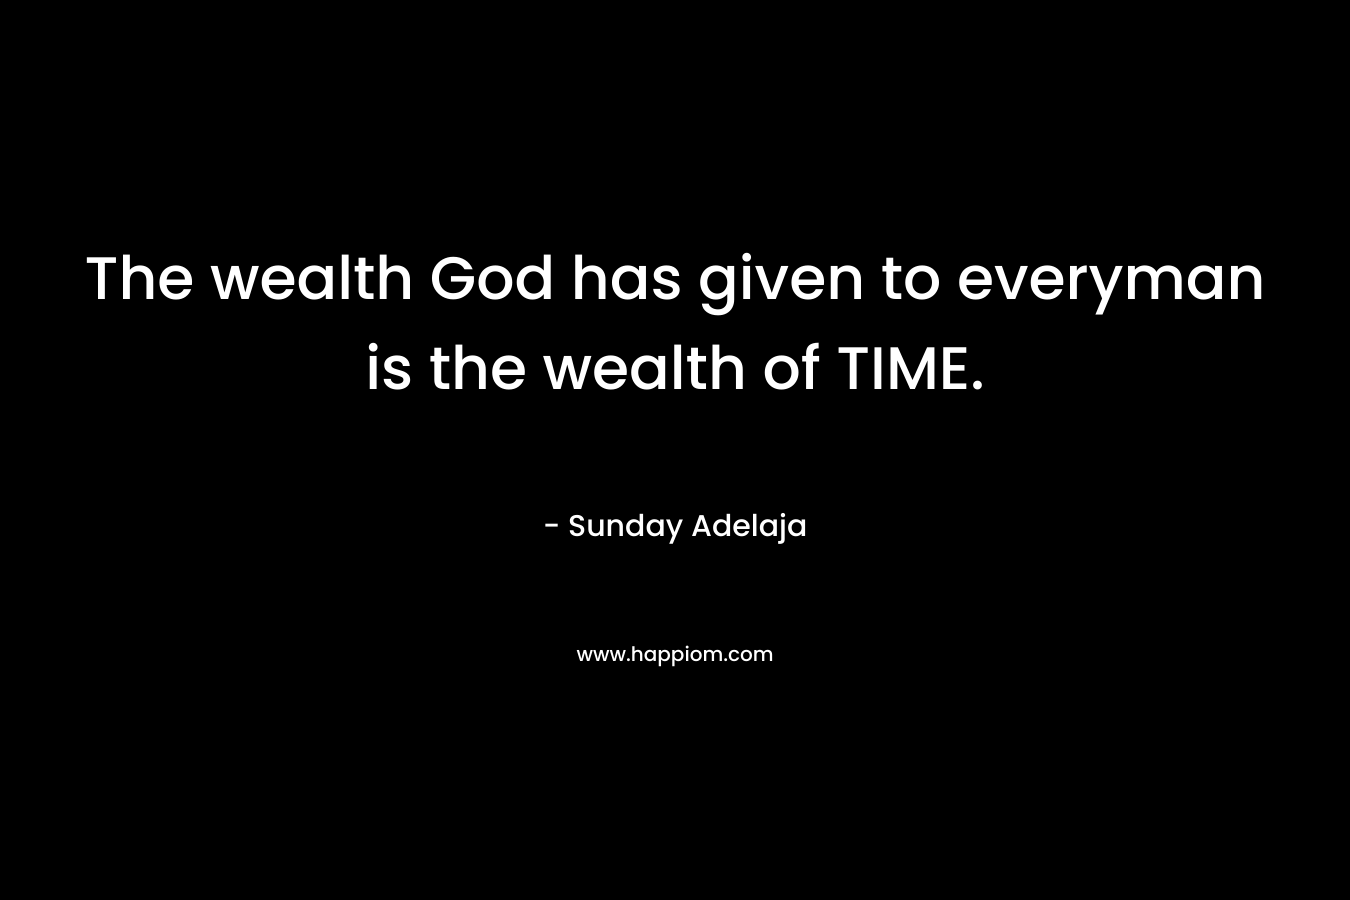 The wealth God has given to everyman is the wealth of TIME.